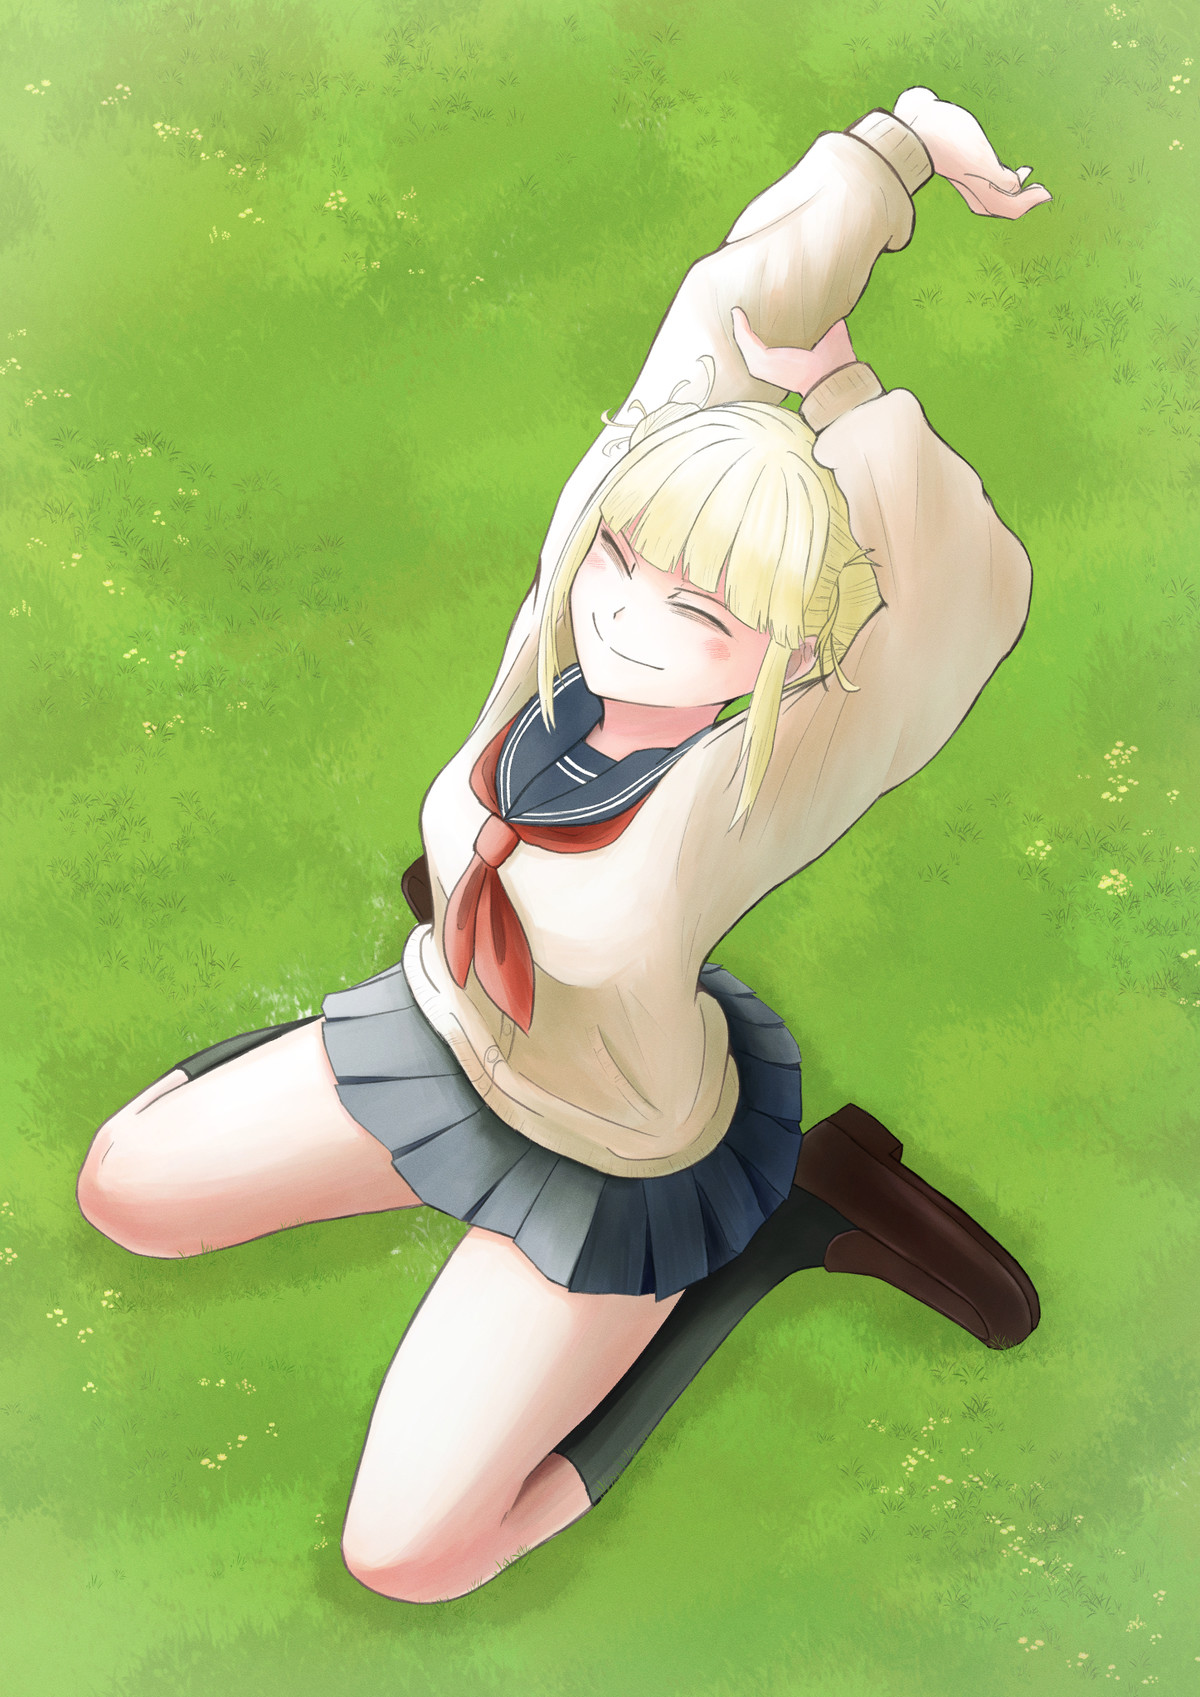 Daily Toga - 921: Stretchy Toga. join list: DailyToga (477 subs)Mention History Source: .. 